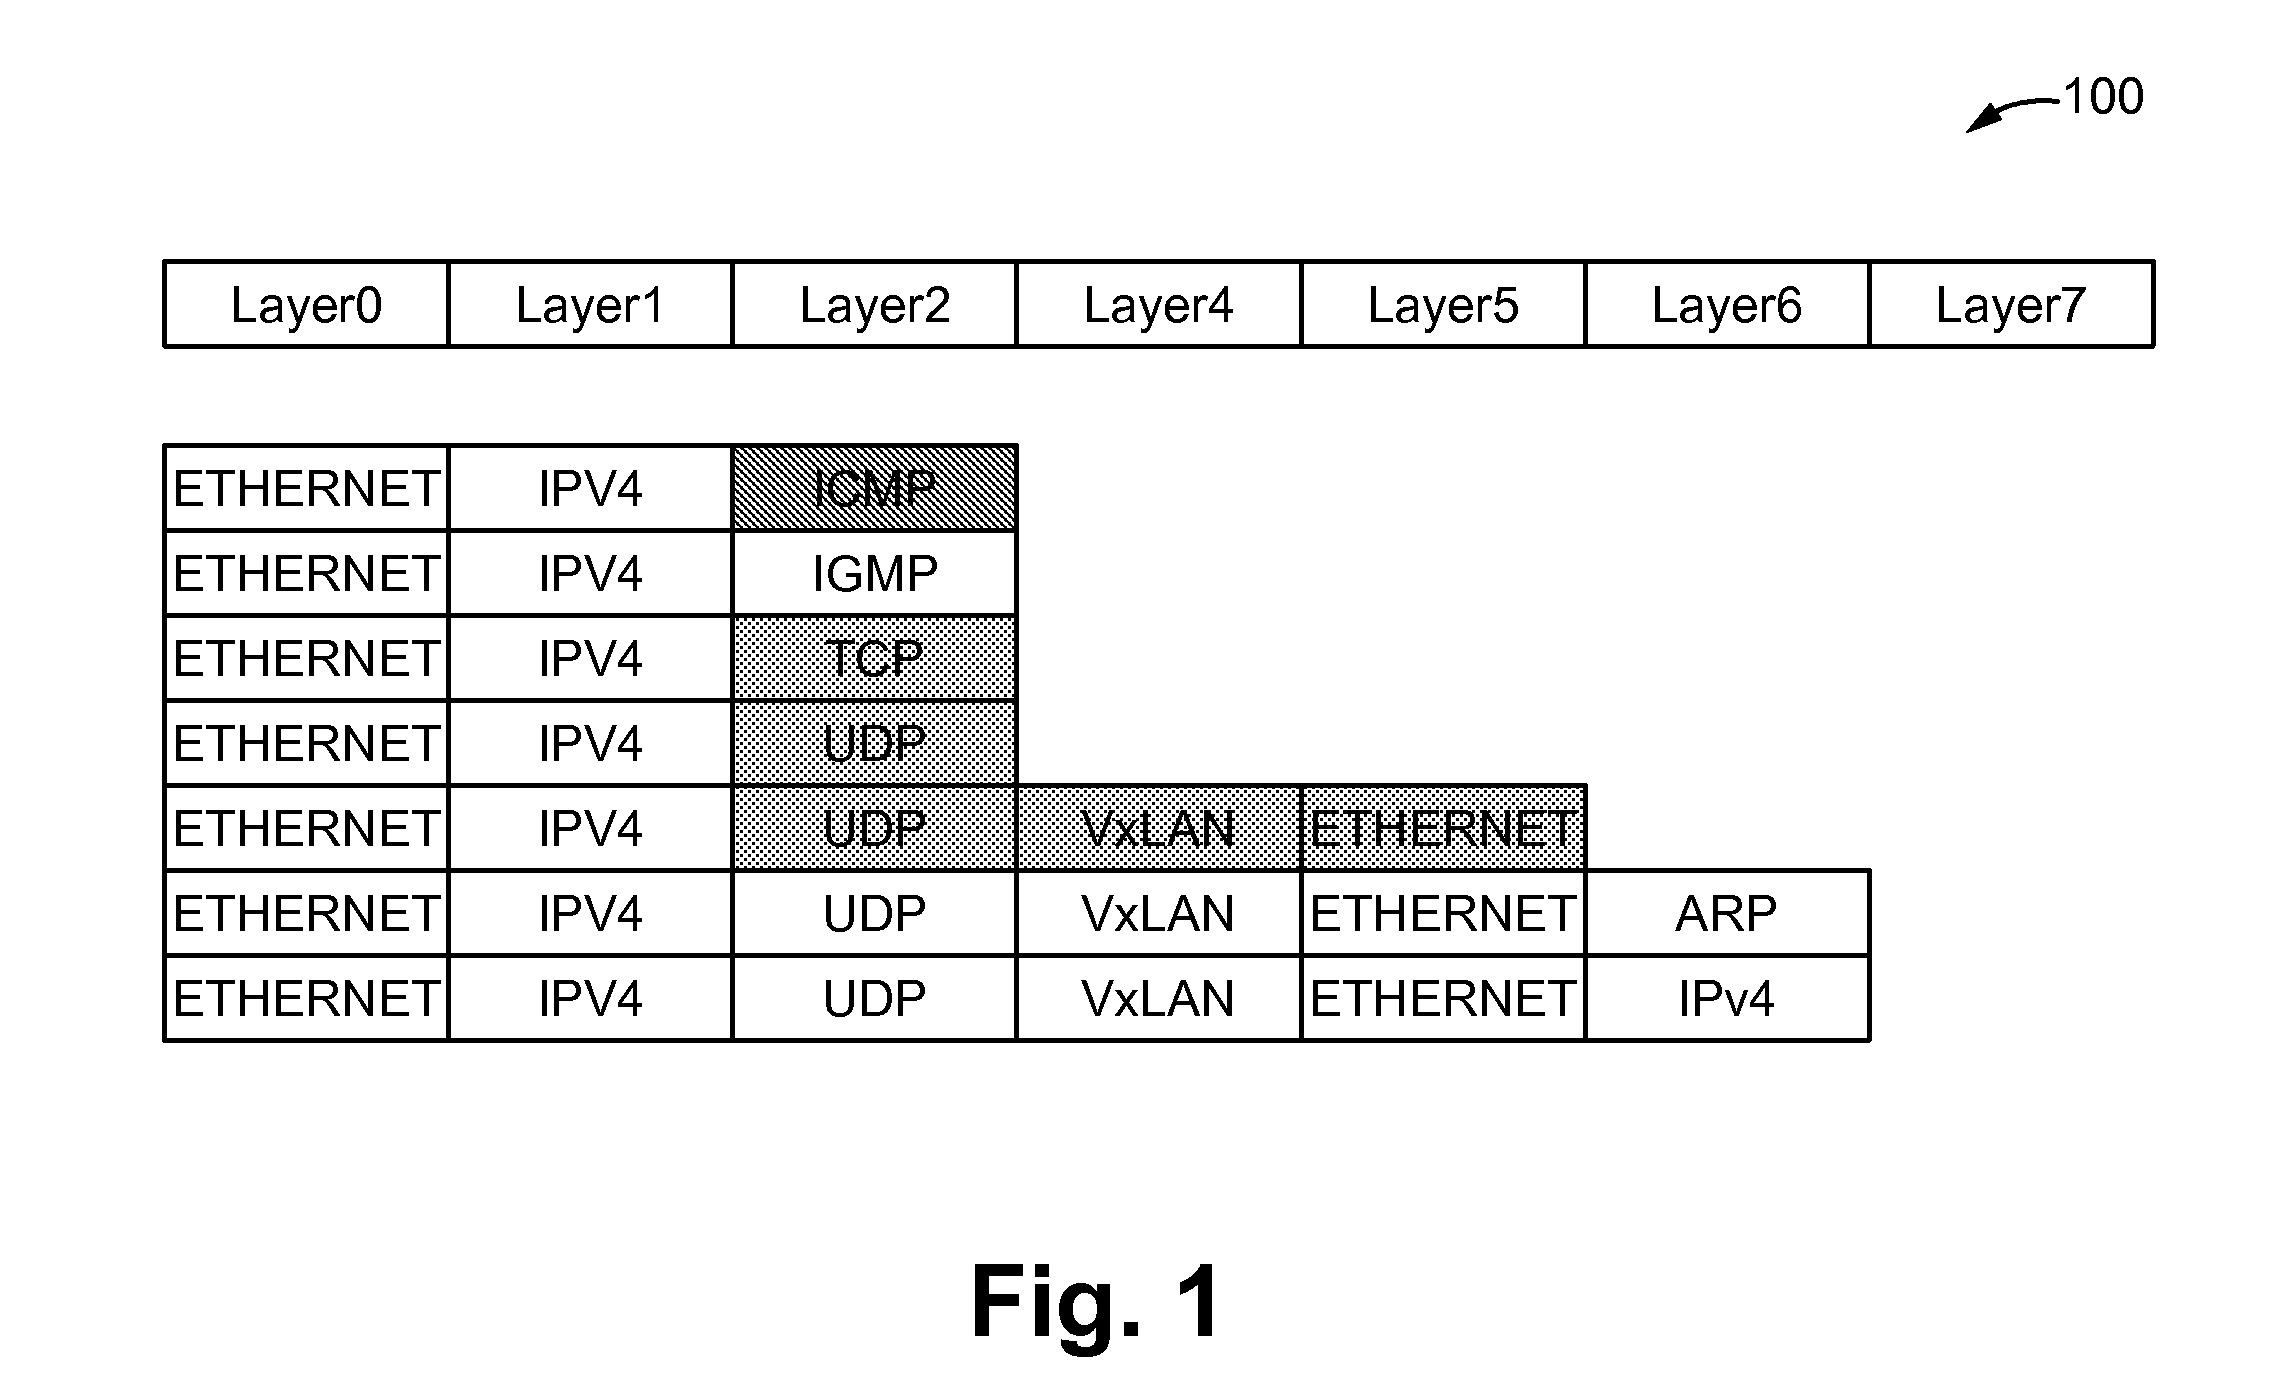 Method of splitting a packet into individual layers for modification and intelligently stitching layers back together after modification and an apparatus thereof